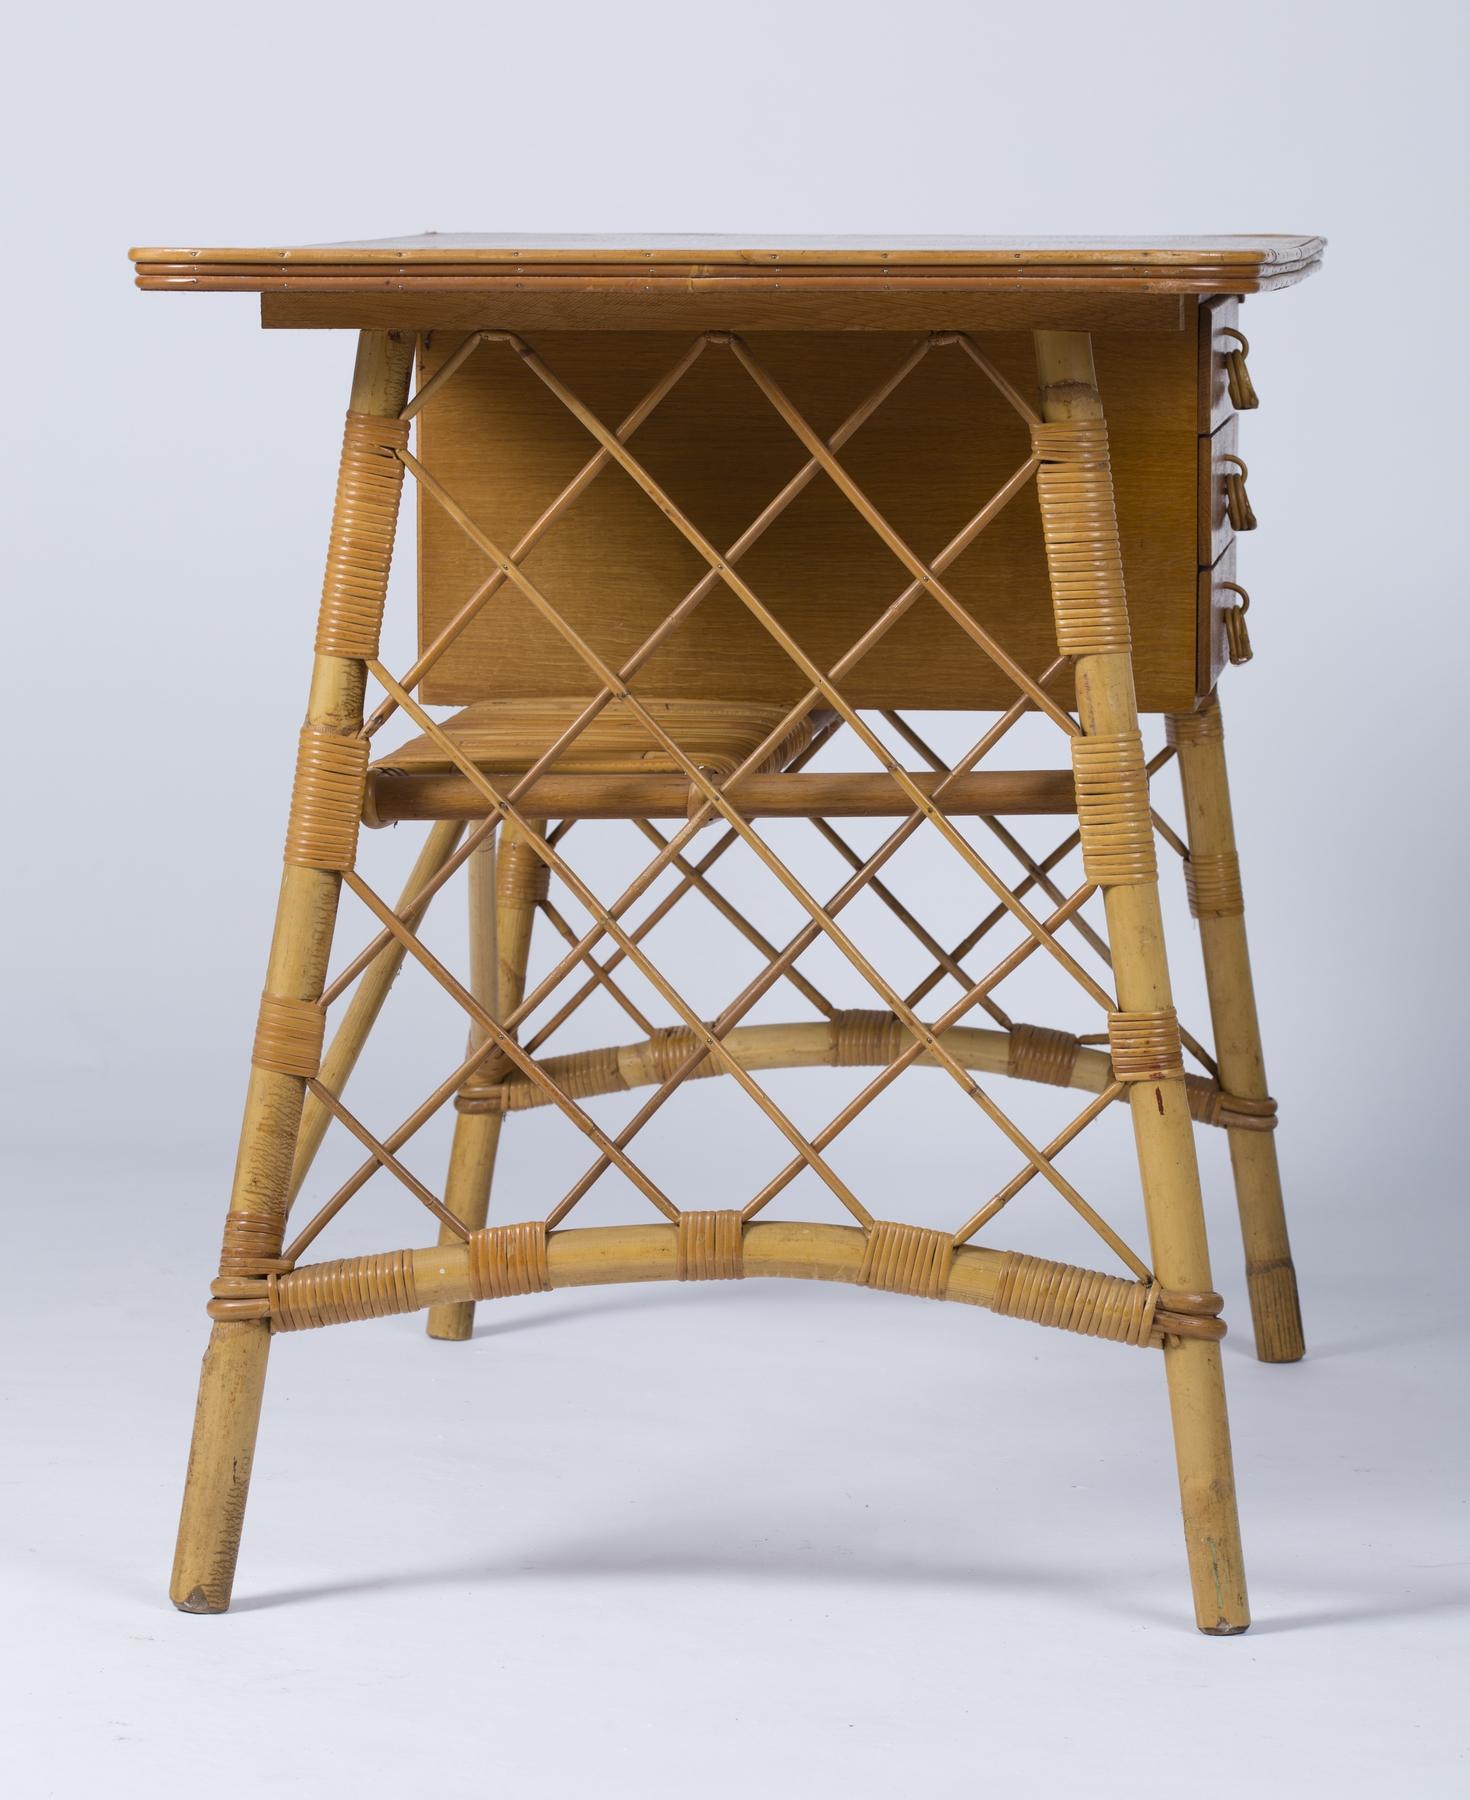 Small desk, stool and wastepaper basket in rattan by Louis Sognot (1892-1970).
Rattan desk with a box suspended from the right-hand side of the tabletop, equipped with three drawers. The sides openworked in rattan trellis.
France circa 1950.